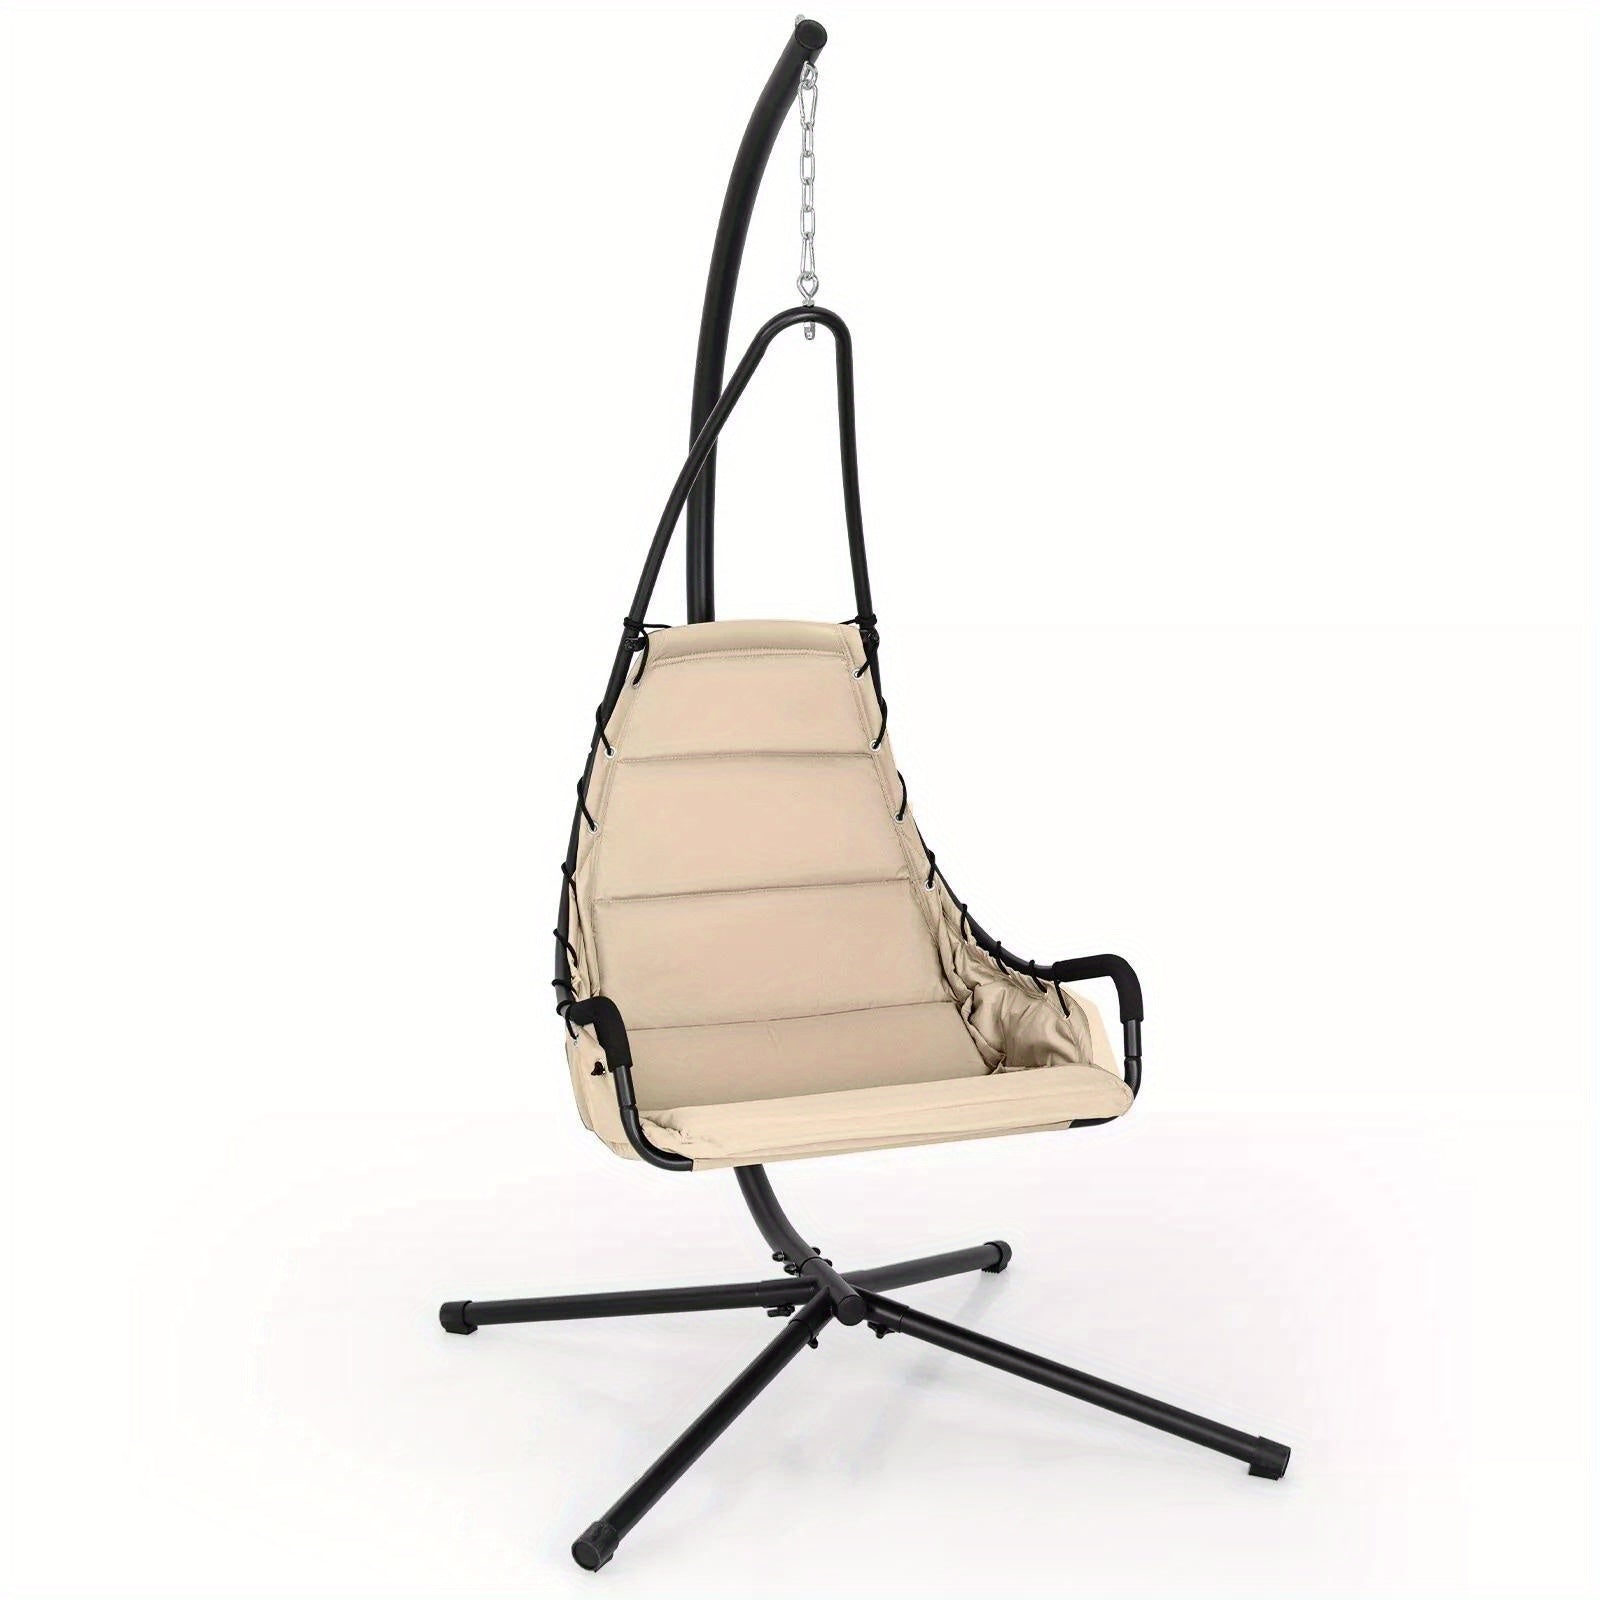 Costway Hanging Swing Chair W/ Heavy - Duty Metal Stand Hammock W/Extra Large Padded Seat - Ammpoure Wellbeing